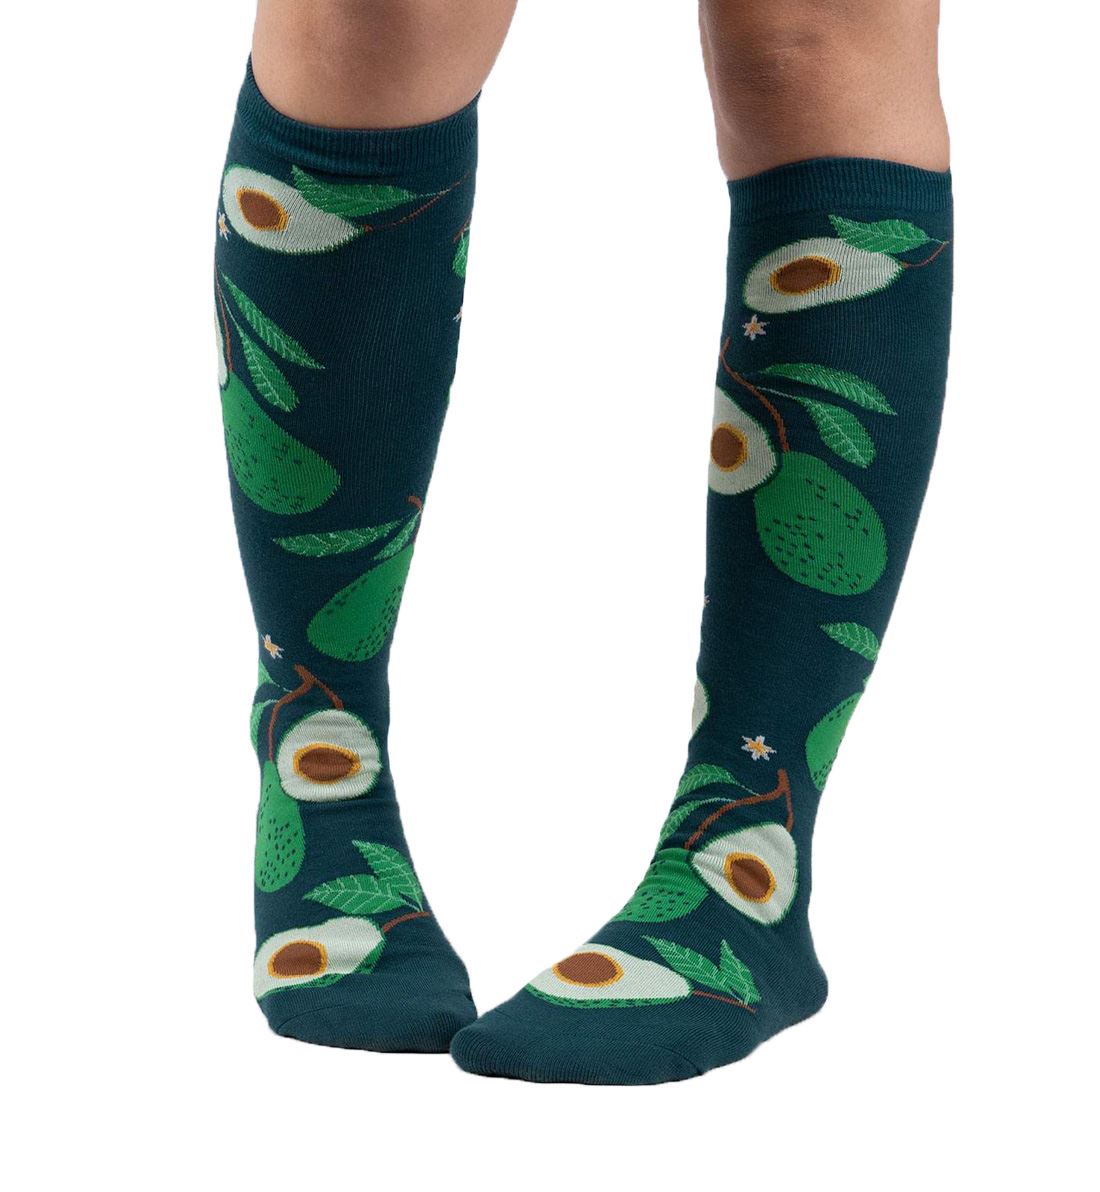 SOCK it to me Unisex Knee High Socks (F0515),Avoca-toes - Avoca-toes,One Size